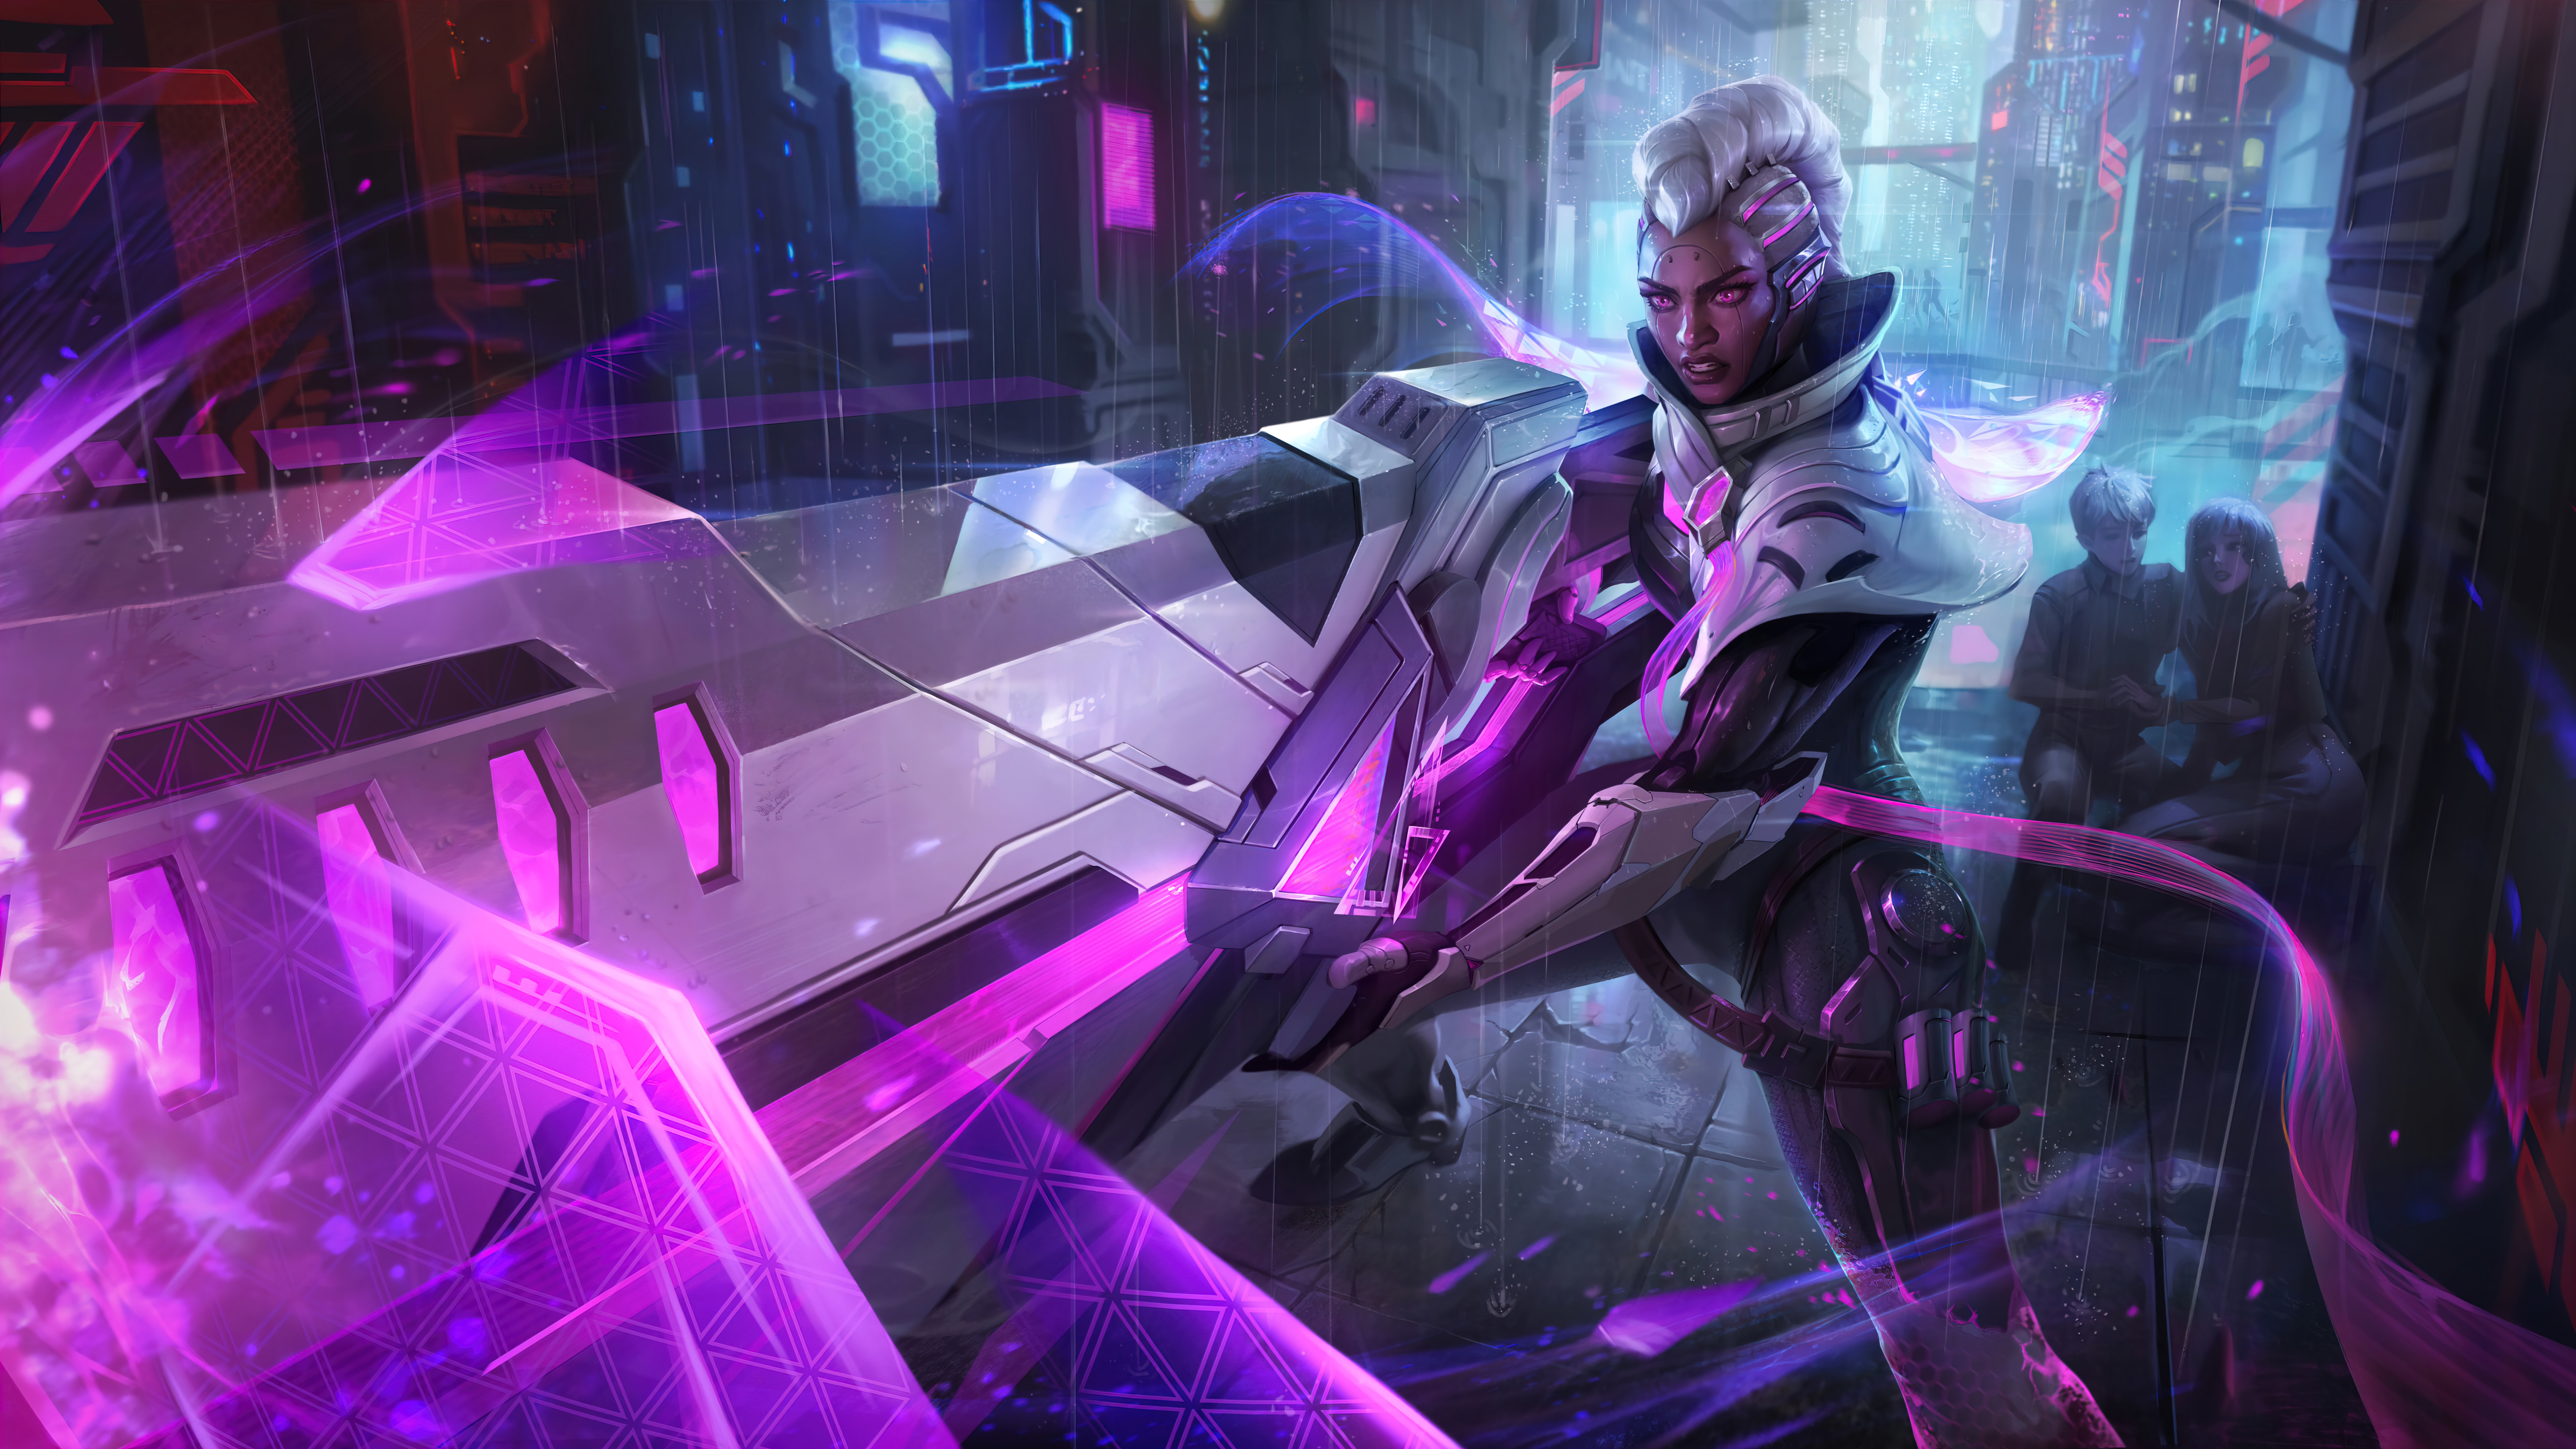 General 7680x4320 Senna (League of Legends) League of Legends Riot Games 4K digital art Support (League Of Legends) ADC Adcarry GZG PC gaming girls with guns PROJECT (League of Legends)